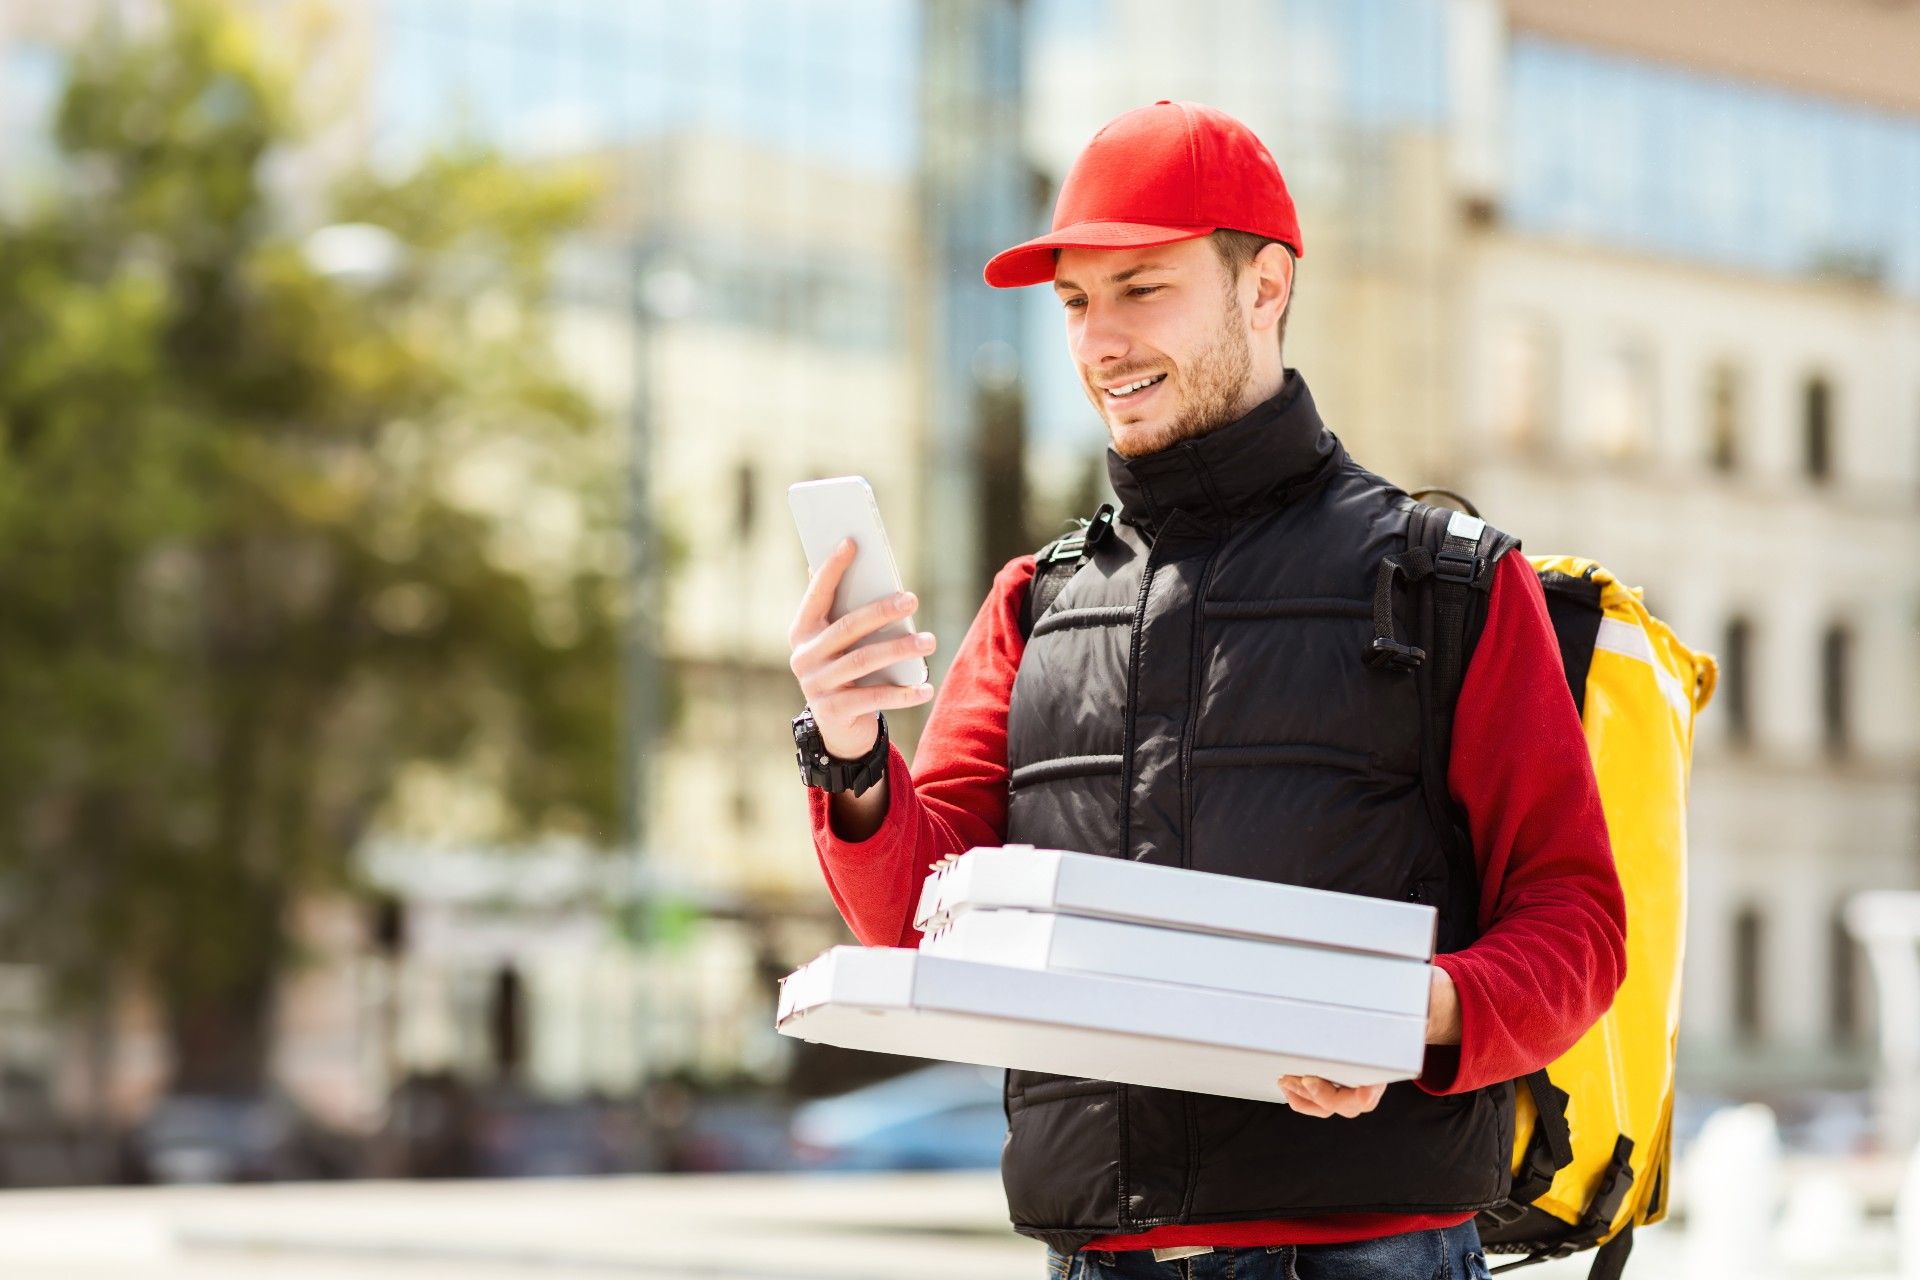 A food delivery man looks at a smartphone while carrying pizza boxes - delivery fees